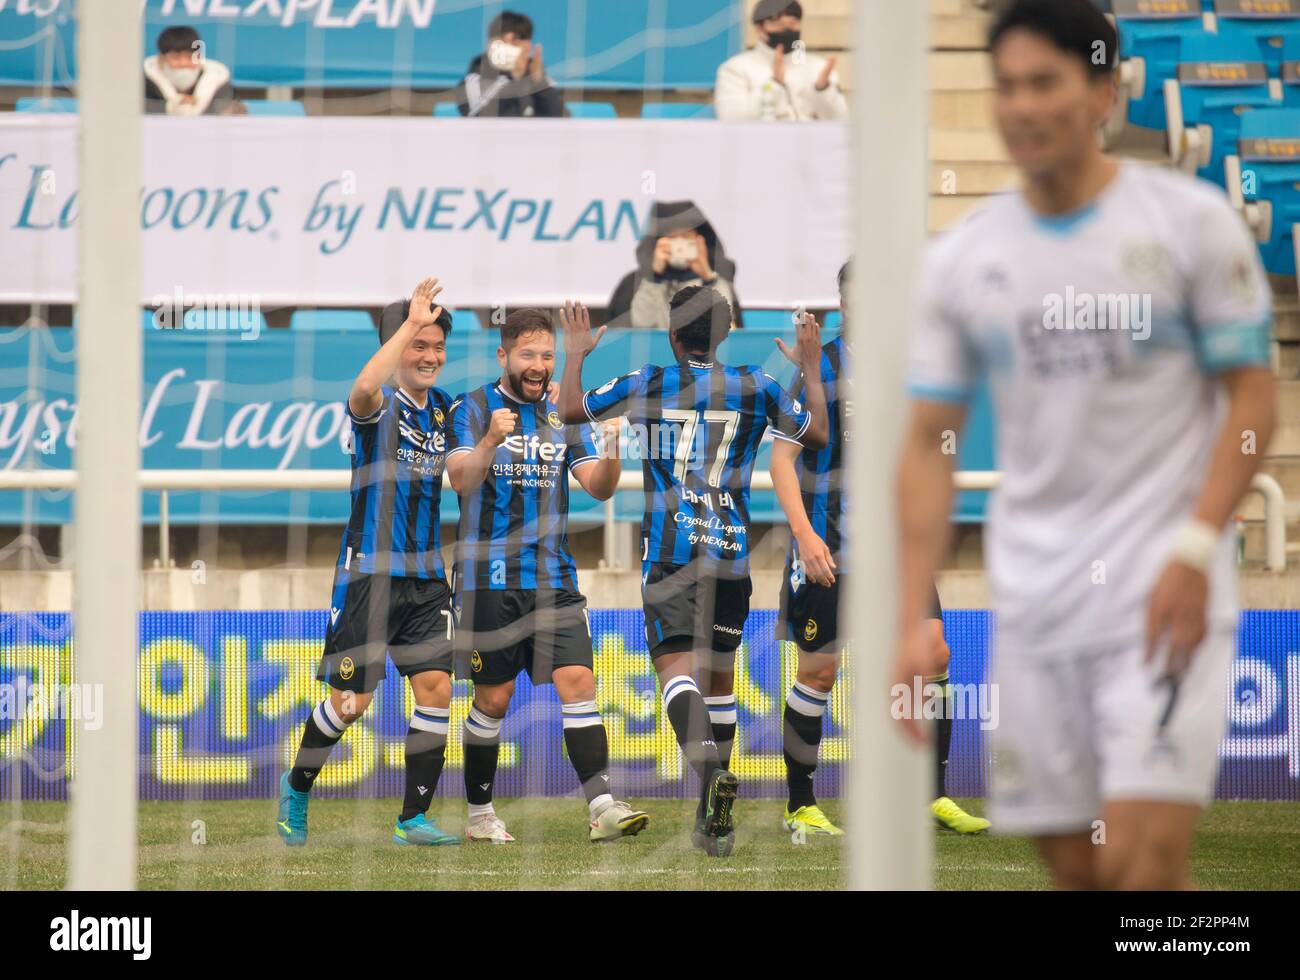 Incheon, South Korea. 06th Mar, 2021. (L-R) Goo Boon-Cheul, Costa Rican midfielder Elias Aguilar and Brazilian striker Guilherme Ferreira Pinto of Incheon United FC celebrate after Elias Aguilar scored a goal during the 2nd round of the 2021 K League 1 soccer match between Incheon United FC and Daegu FC at the Incheon Football Stadium.(Final score; Incheon United FC 2:1 Daegu FC) Credit: SOPA Images Limited/Alamy Live News Stock Photo